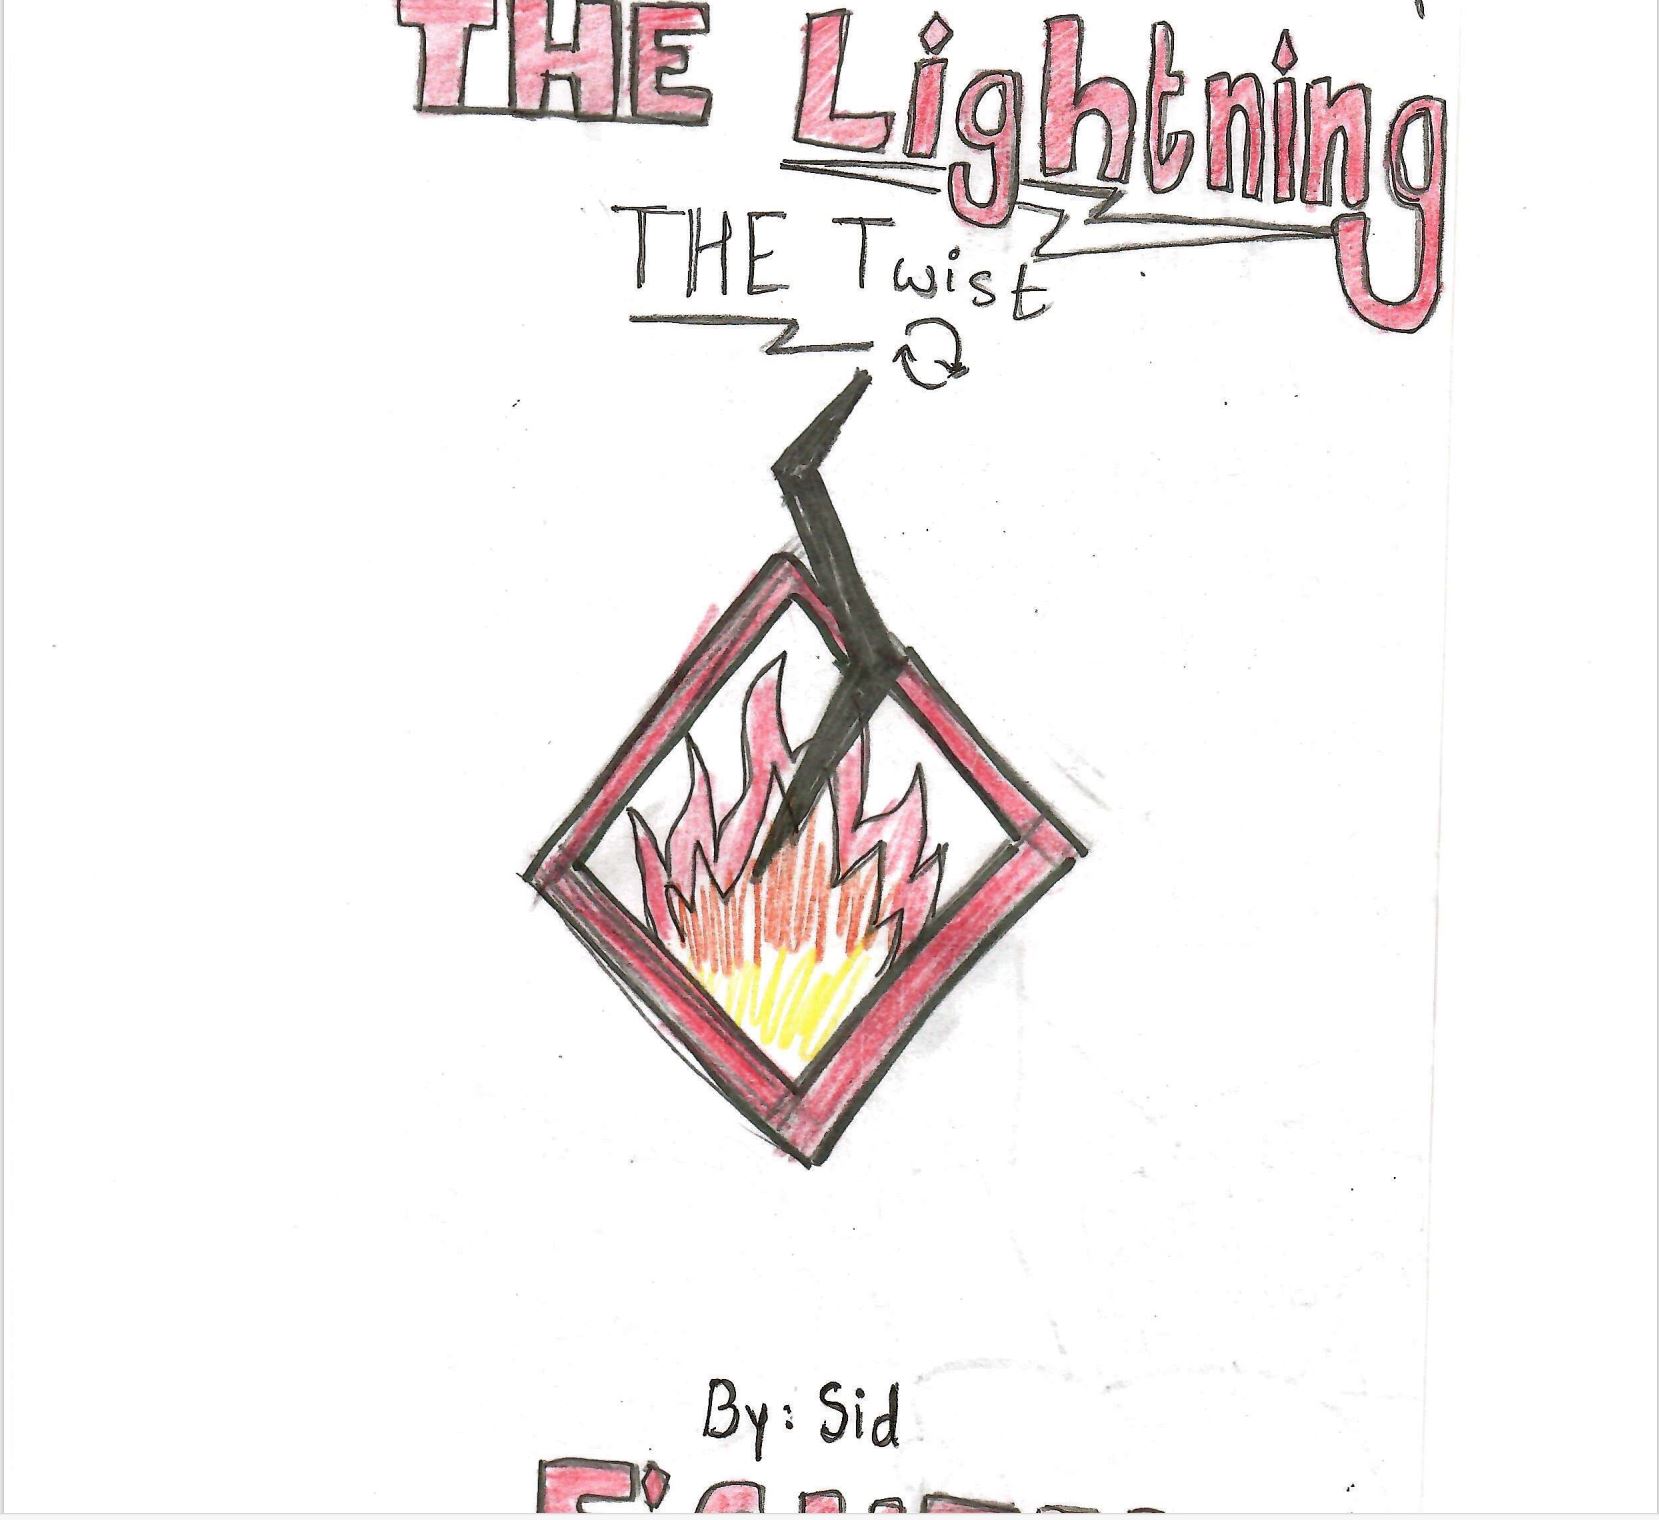 The lightning fighters by Siddharth M.